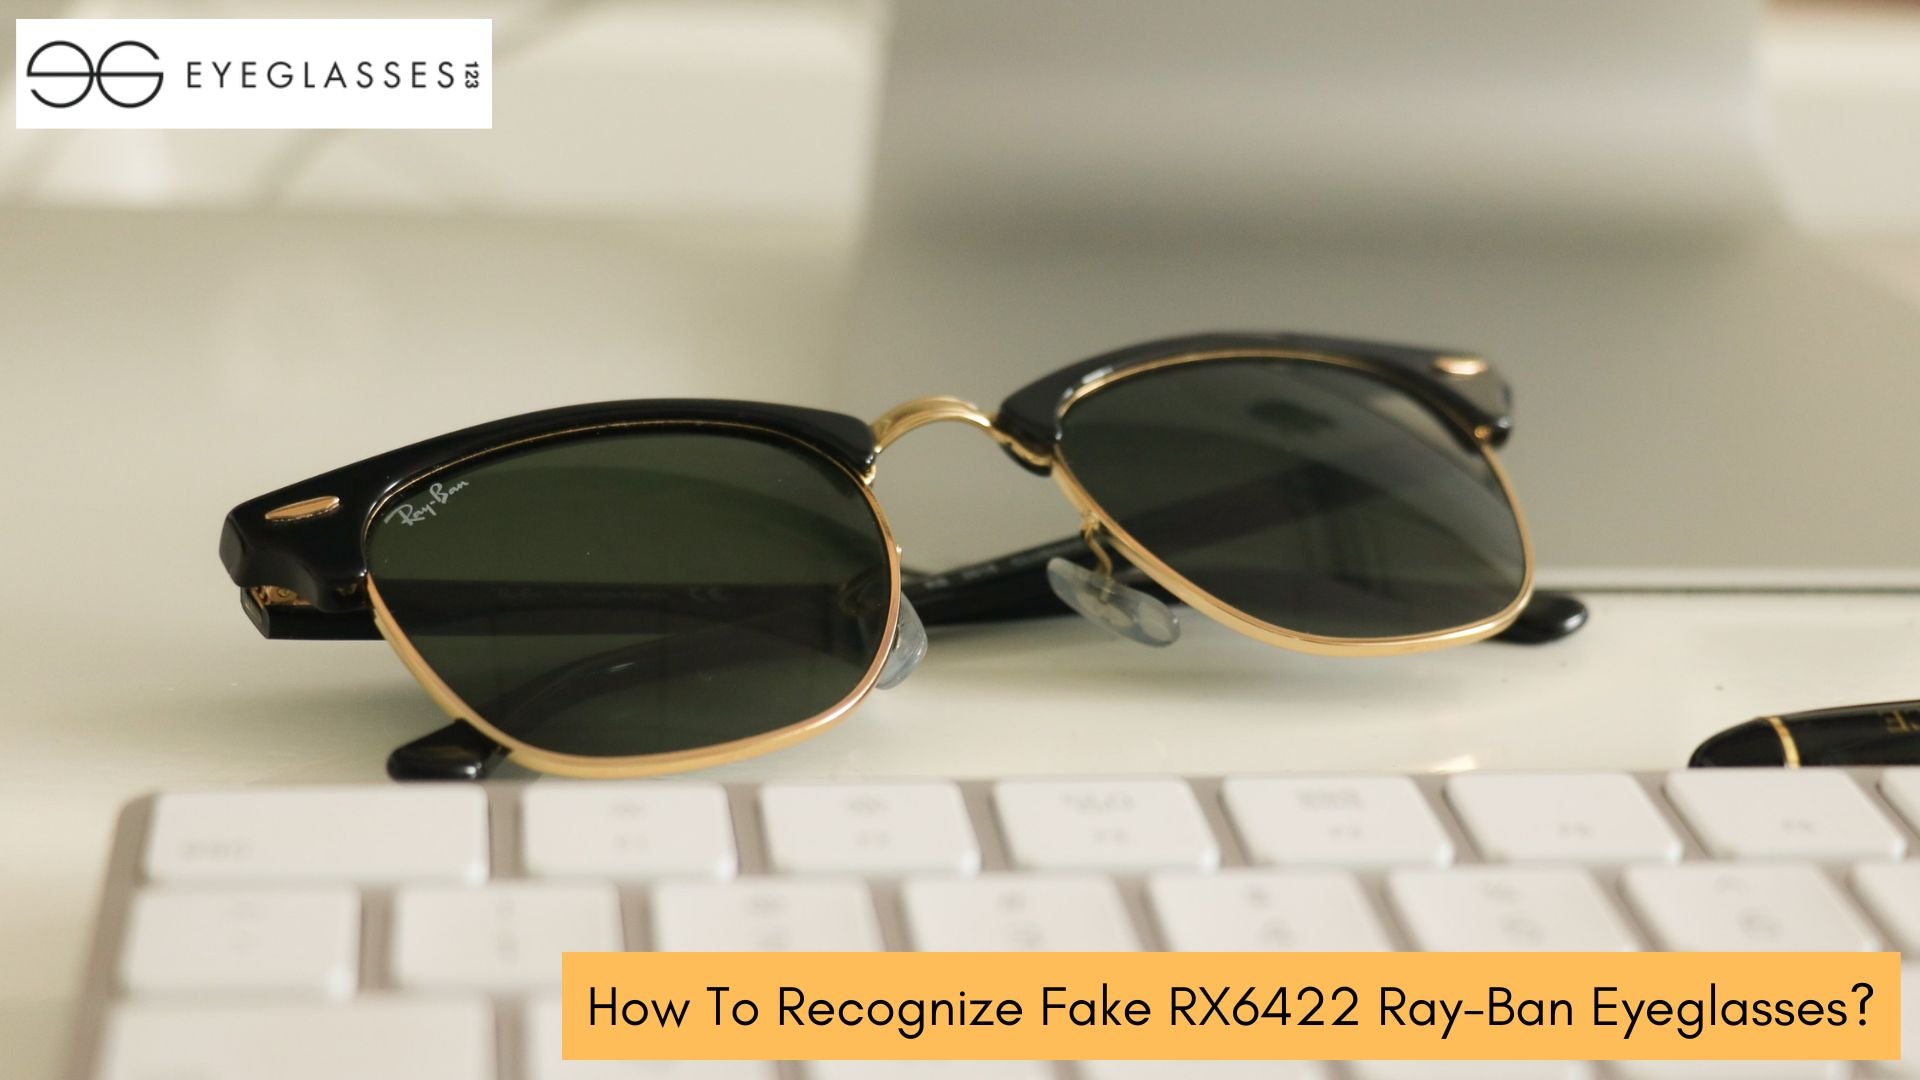 How To Recognize Fake RX6422 Ray-Ban Eyeglasses?